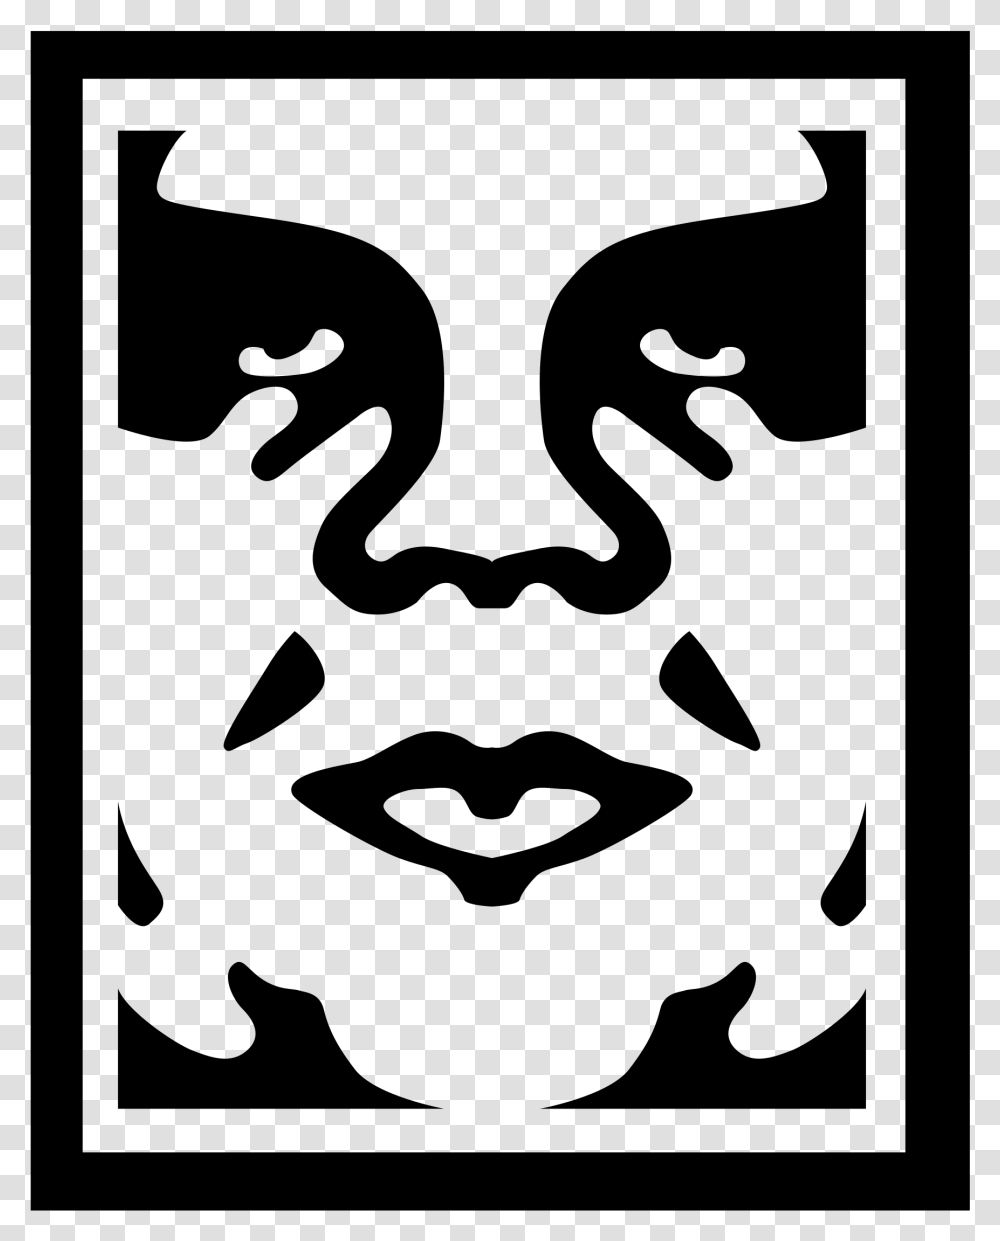 Obey The Giant Logo Andre The Giant Obey, Gray, World Of Warcraft Transparent Png